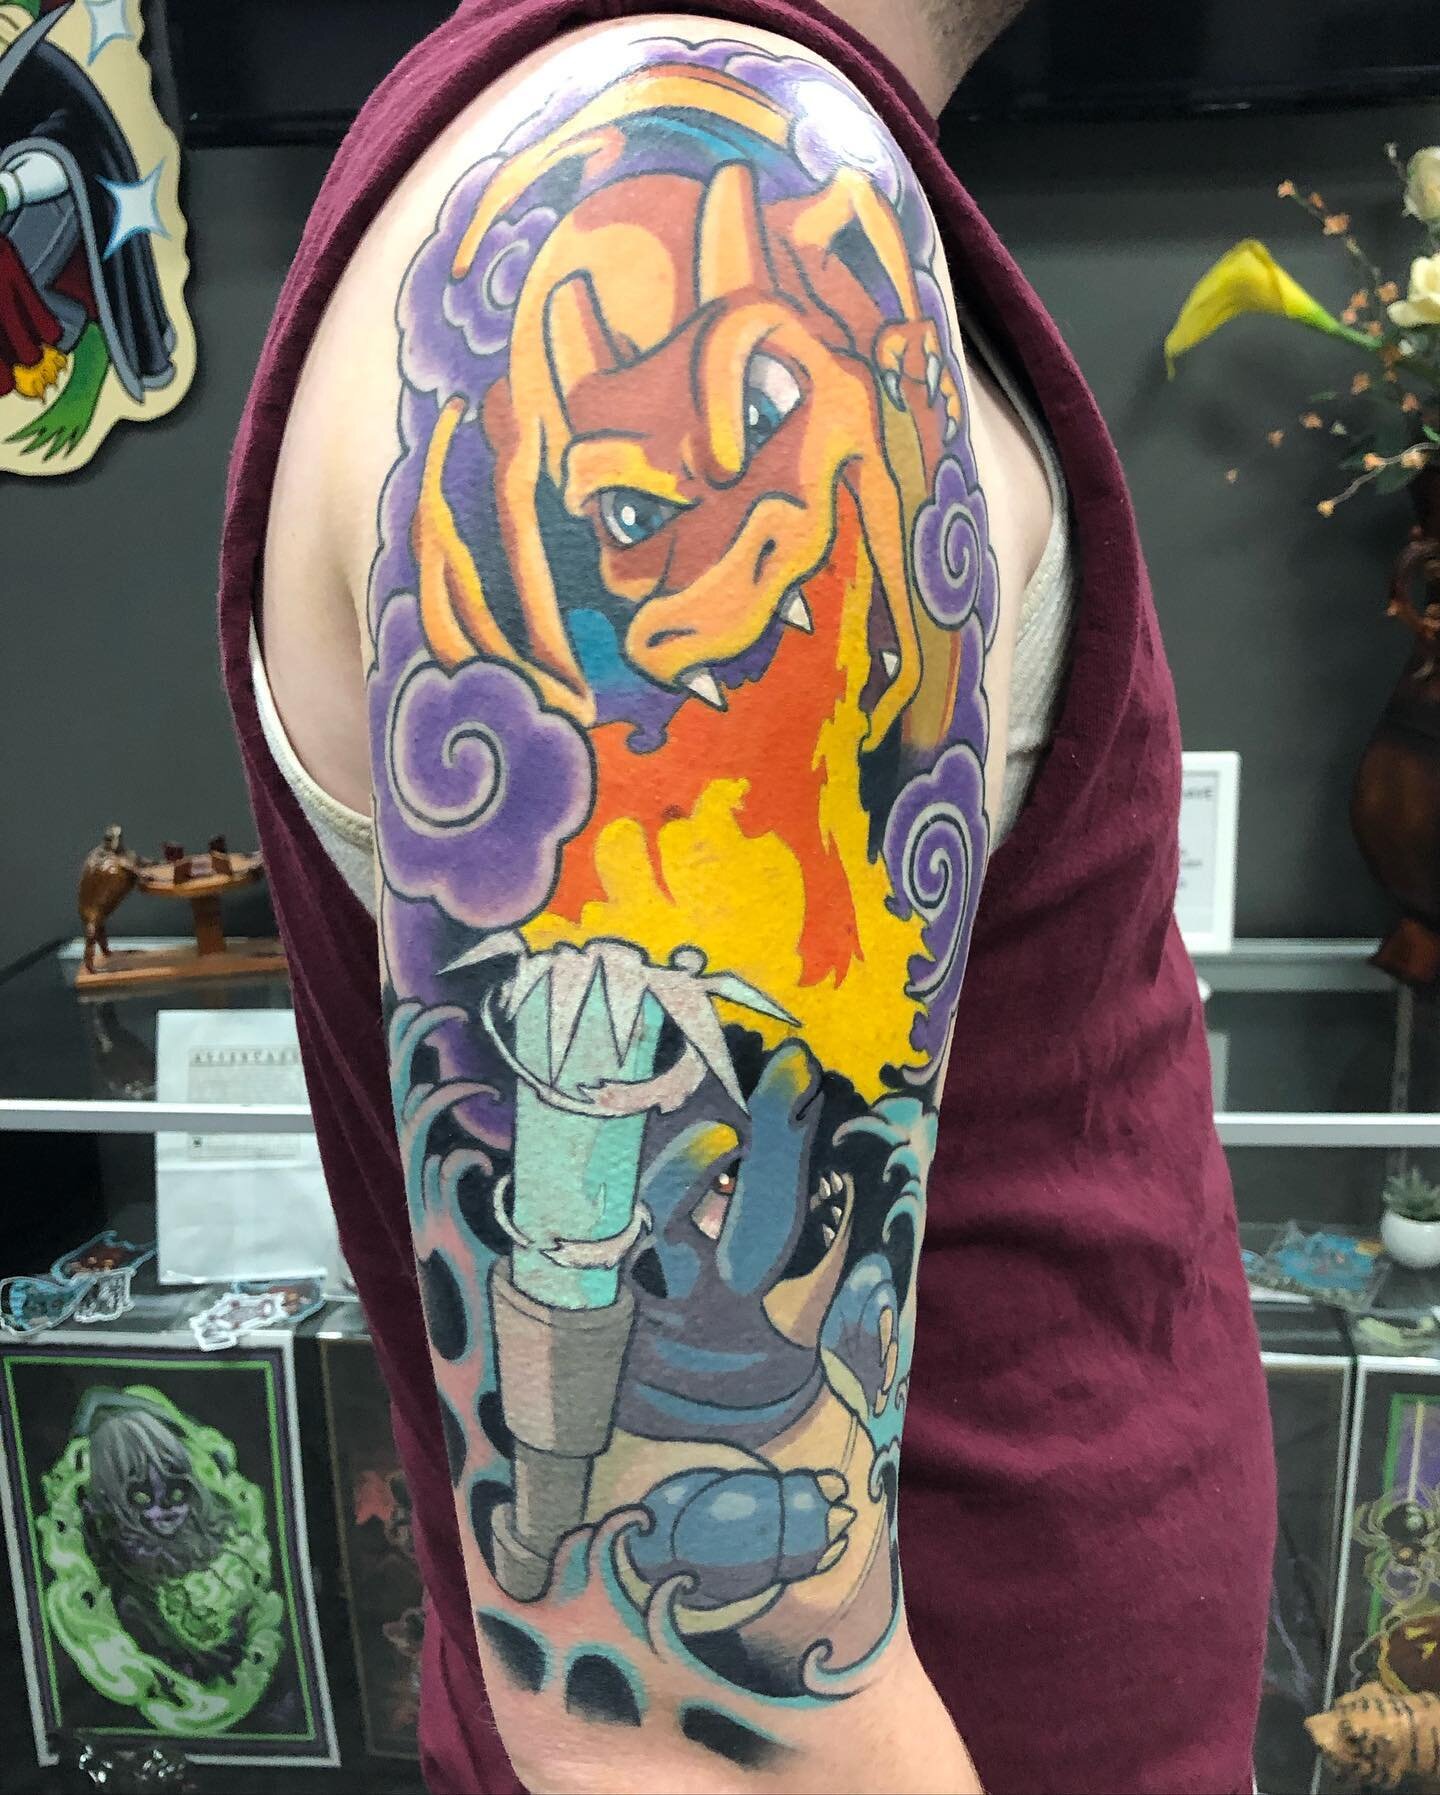 I&rsquo;m terrible about posting. Here&rsquo;s a charizard vs. blastoise i made. Some fresh mostly healed. Thanks for looking! 
.
.
.
.
#pokemon #pokemontattoo #charizard #blastoise #charizardtattoo #blastoisetattoo #pokemonmaster #tattoo